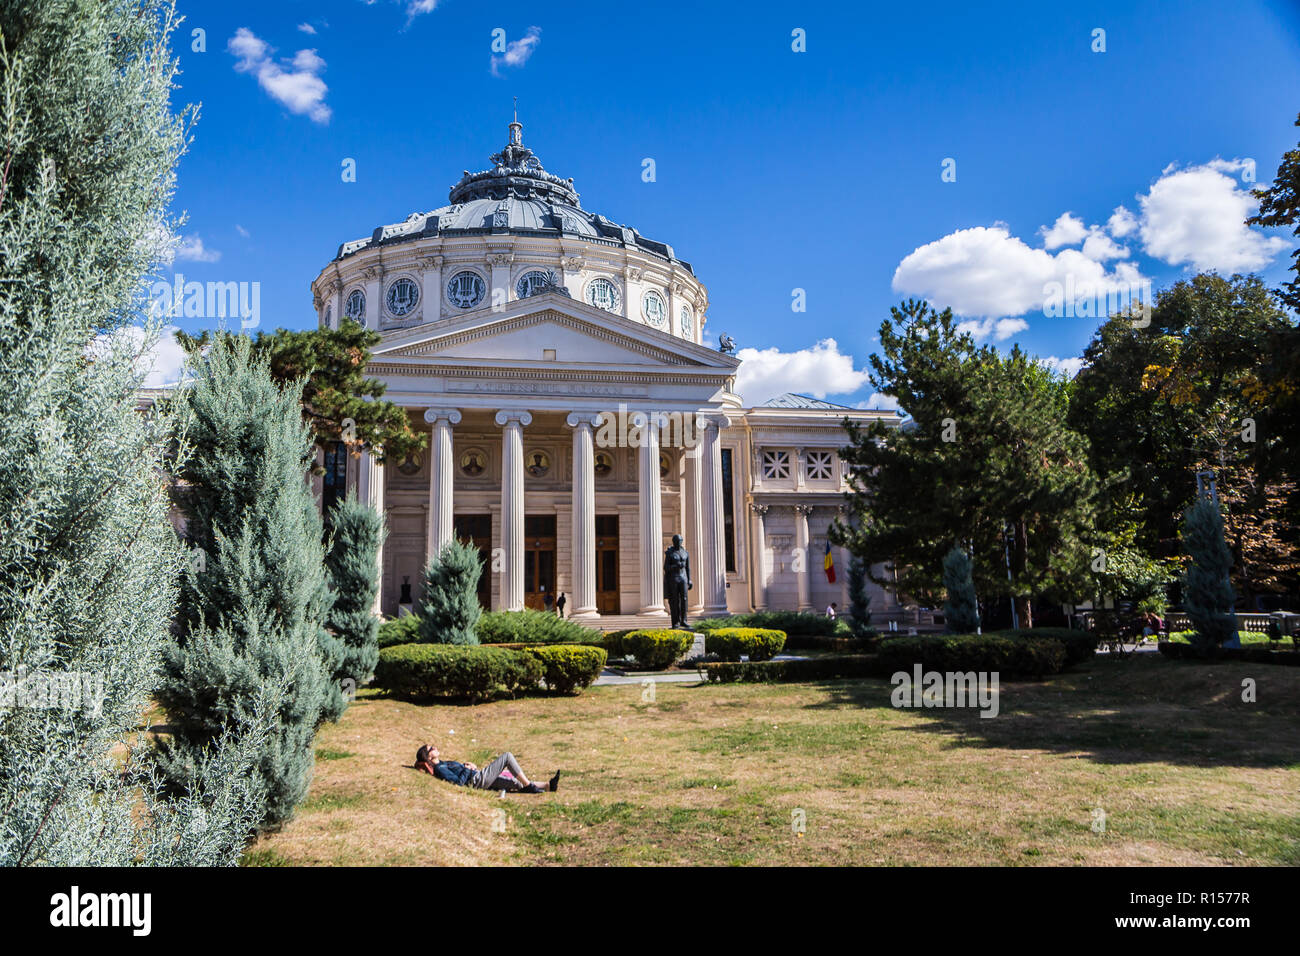 Bucharest, Romania - September 25, 2018 - a woman relaxes in the sun on the grass in front of Roman Athenaeum, Bucharest's most prestigious concert ha Stock Photo